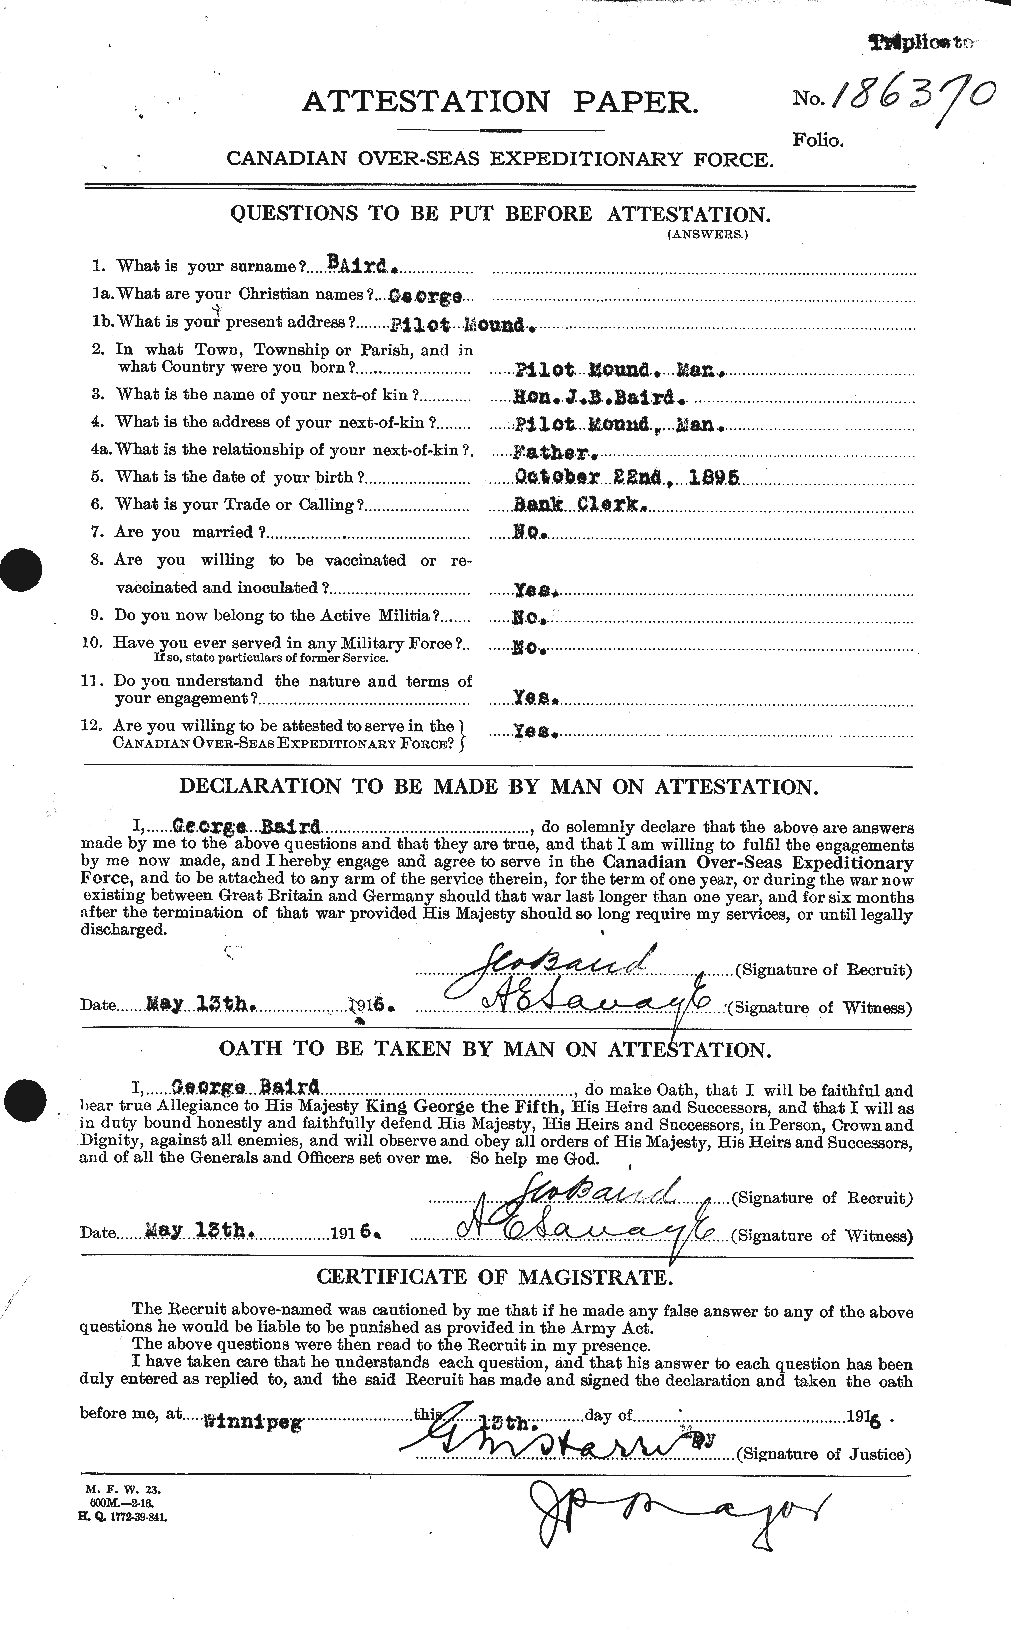 Personnel Records of the First World War - CEF 226668a